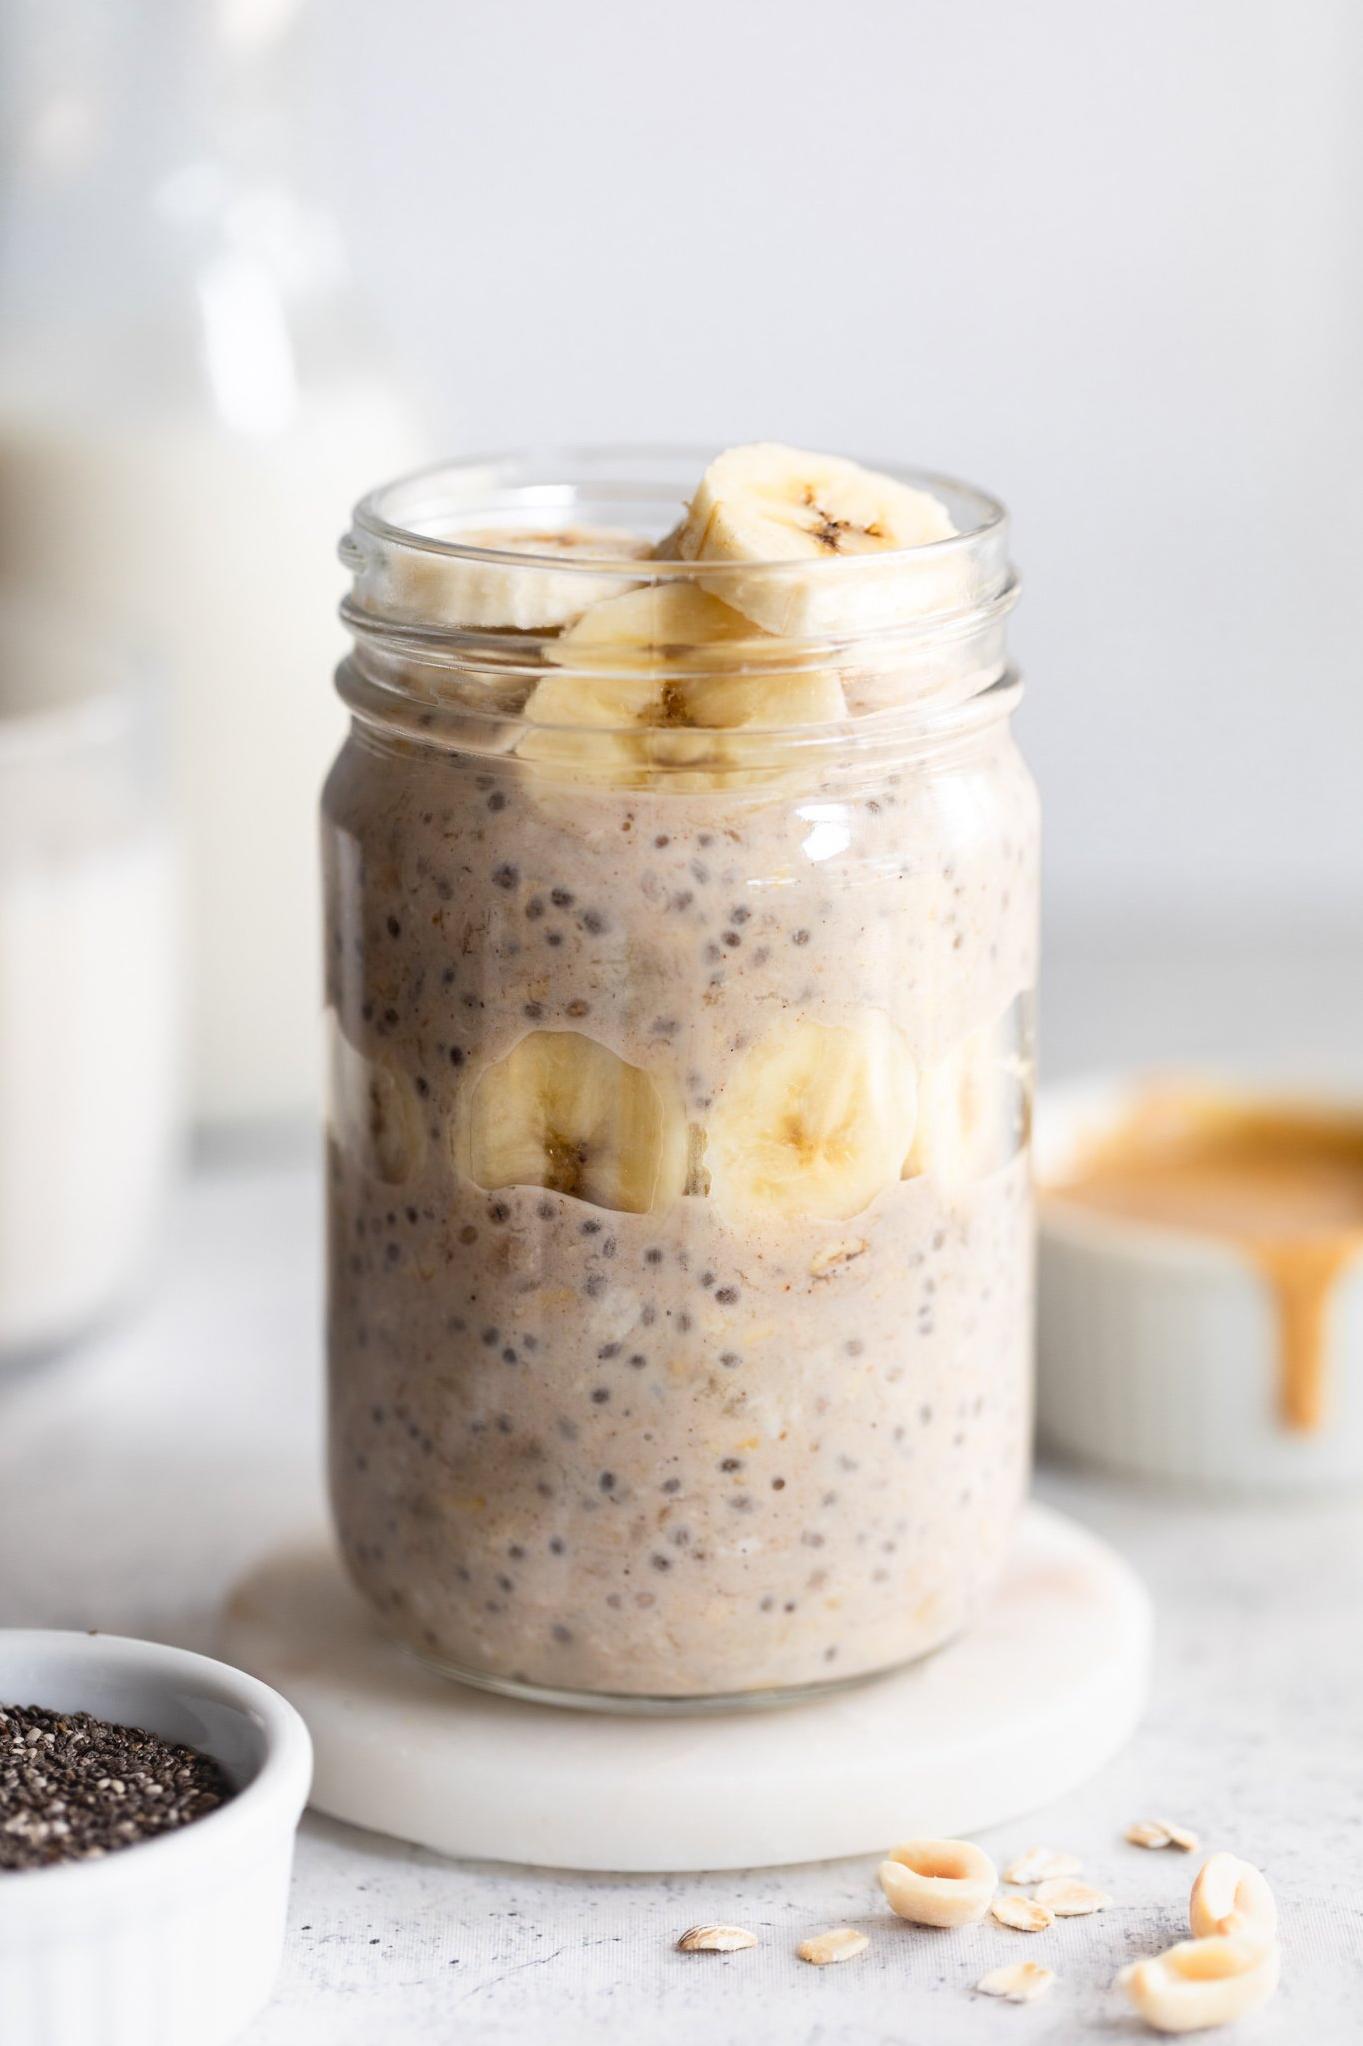 Protein-Packed Overnight Oats: Start Your Day Strong